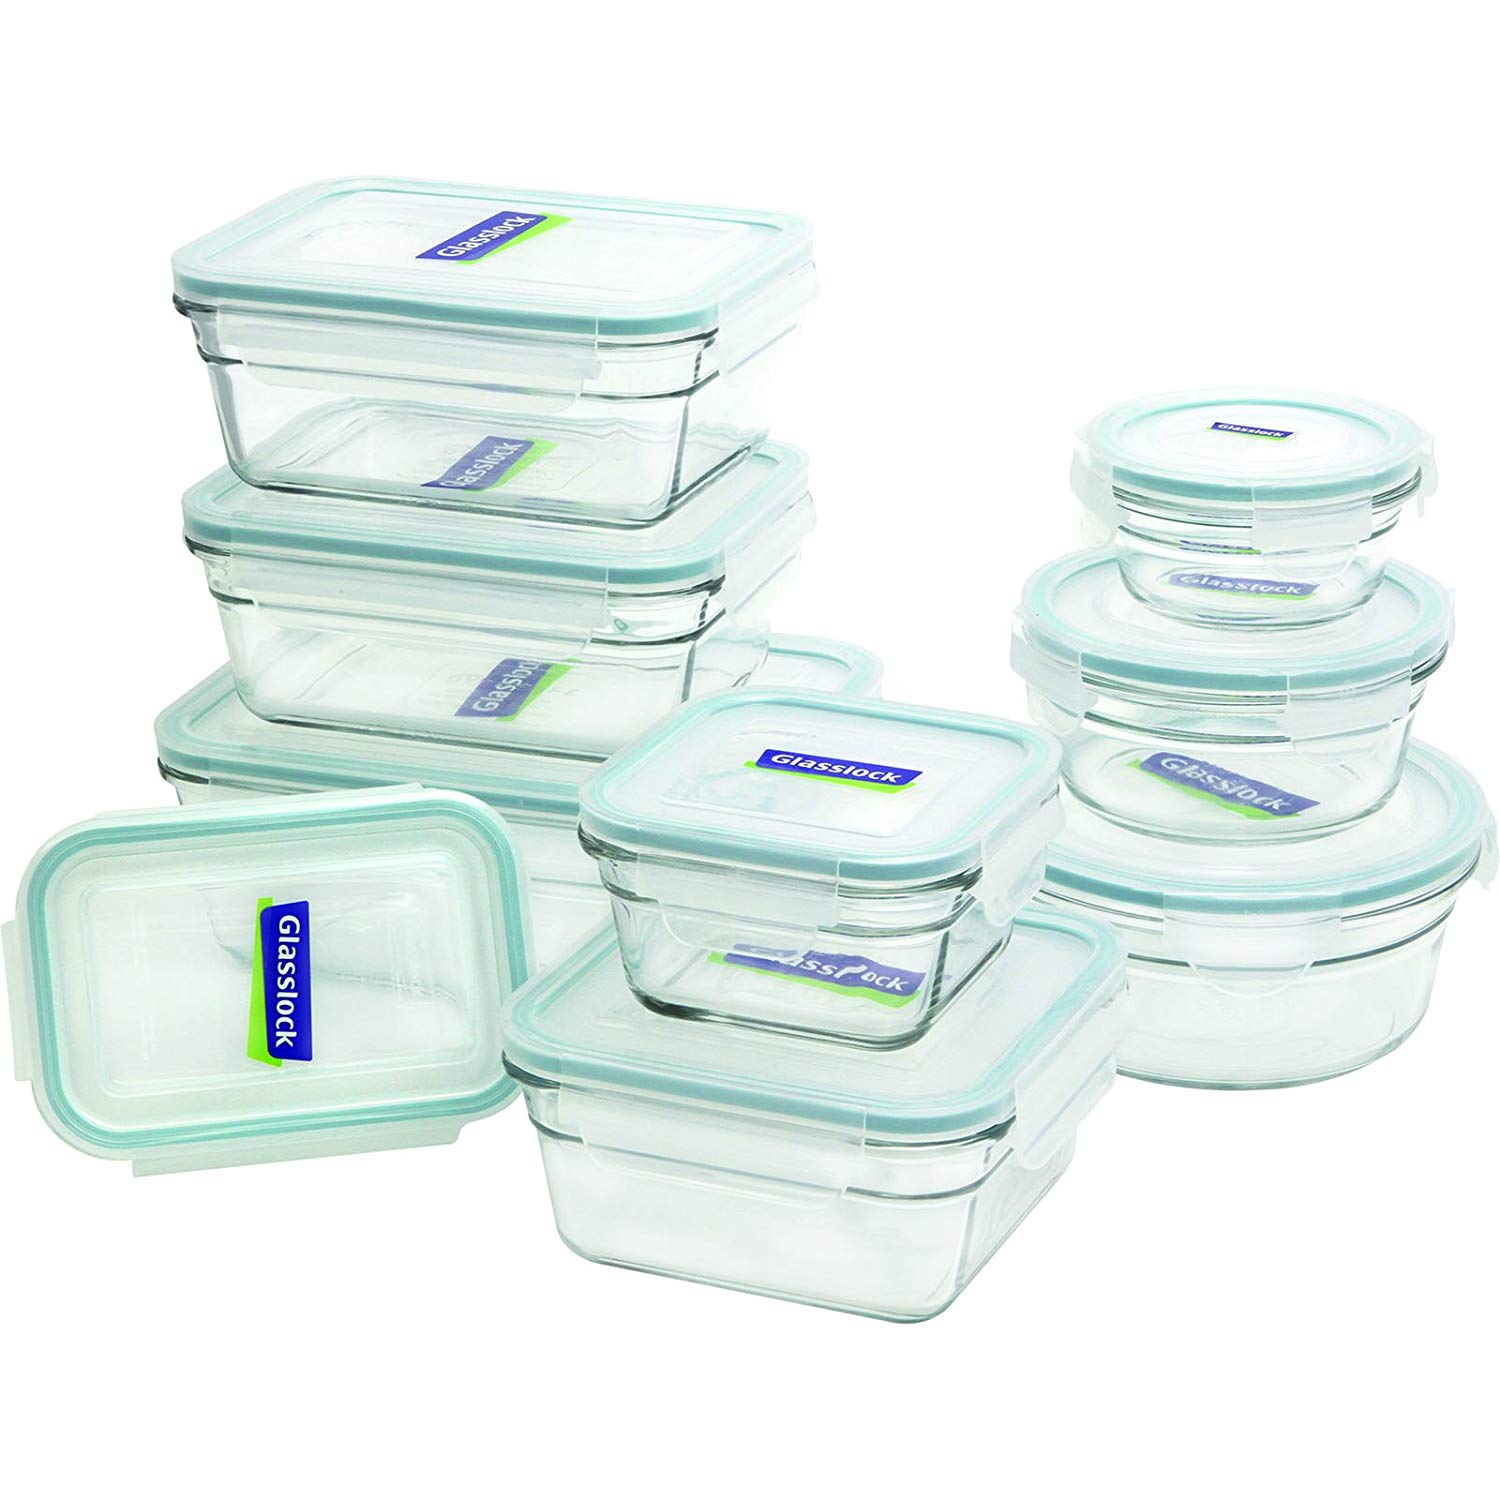 Glass Food Storage Containers with lids